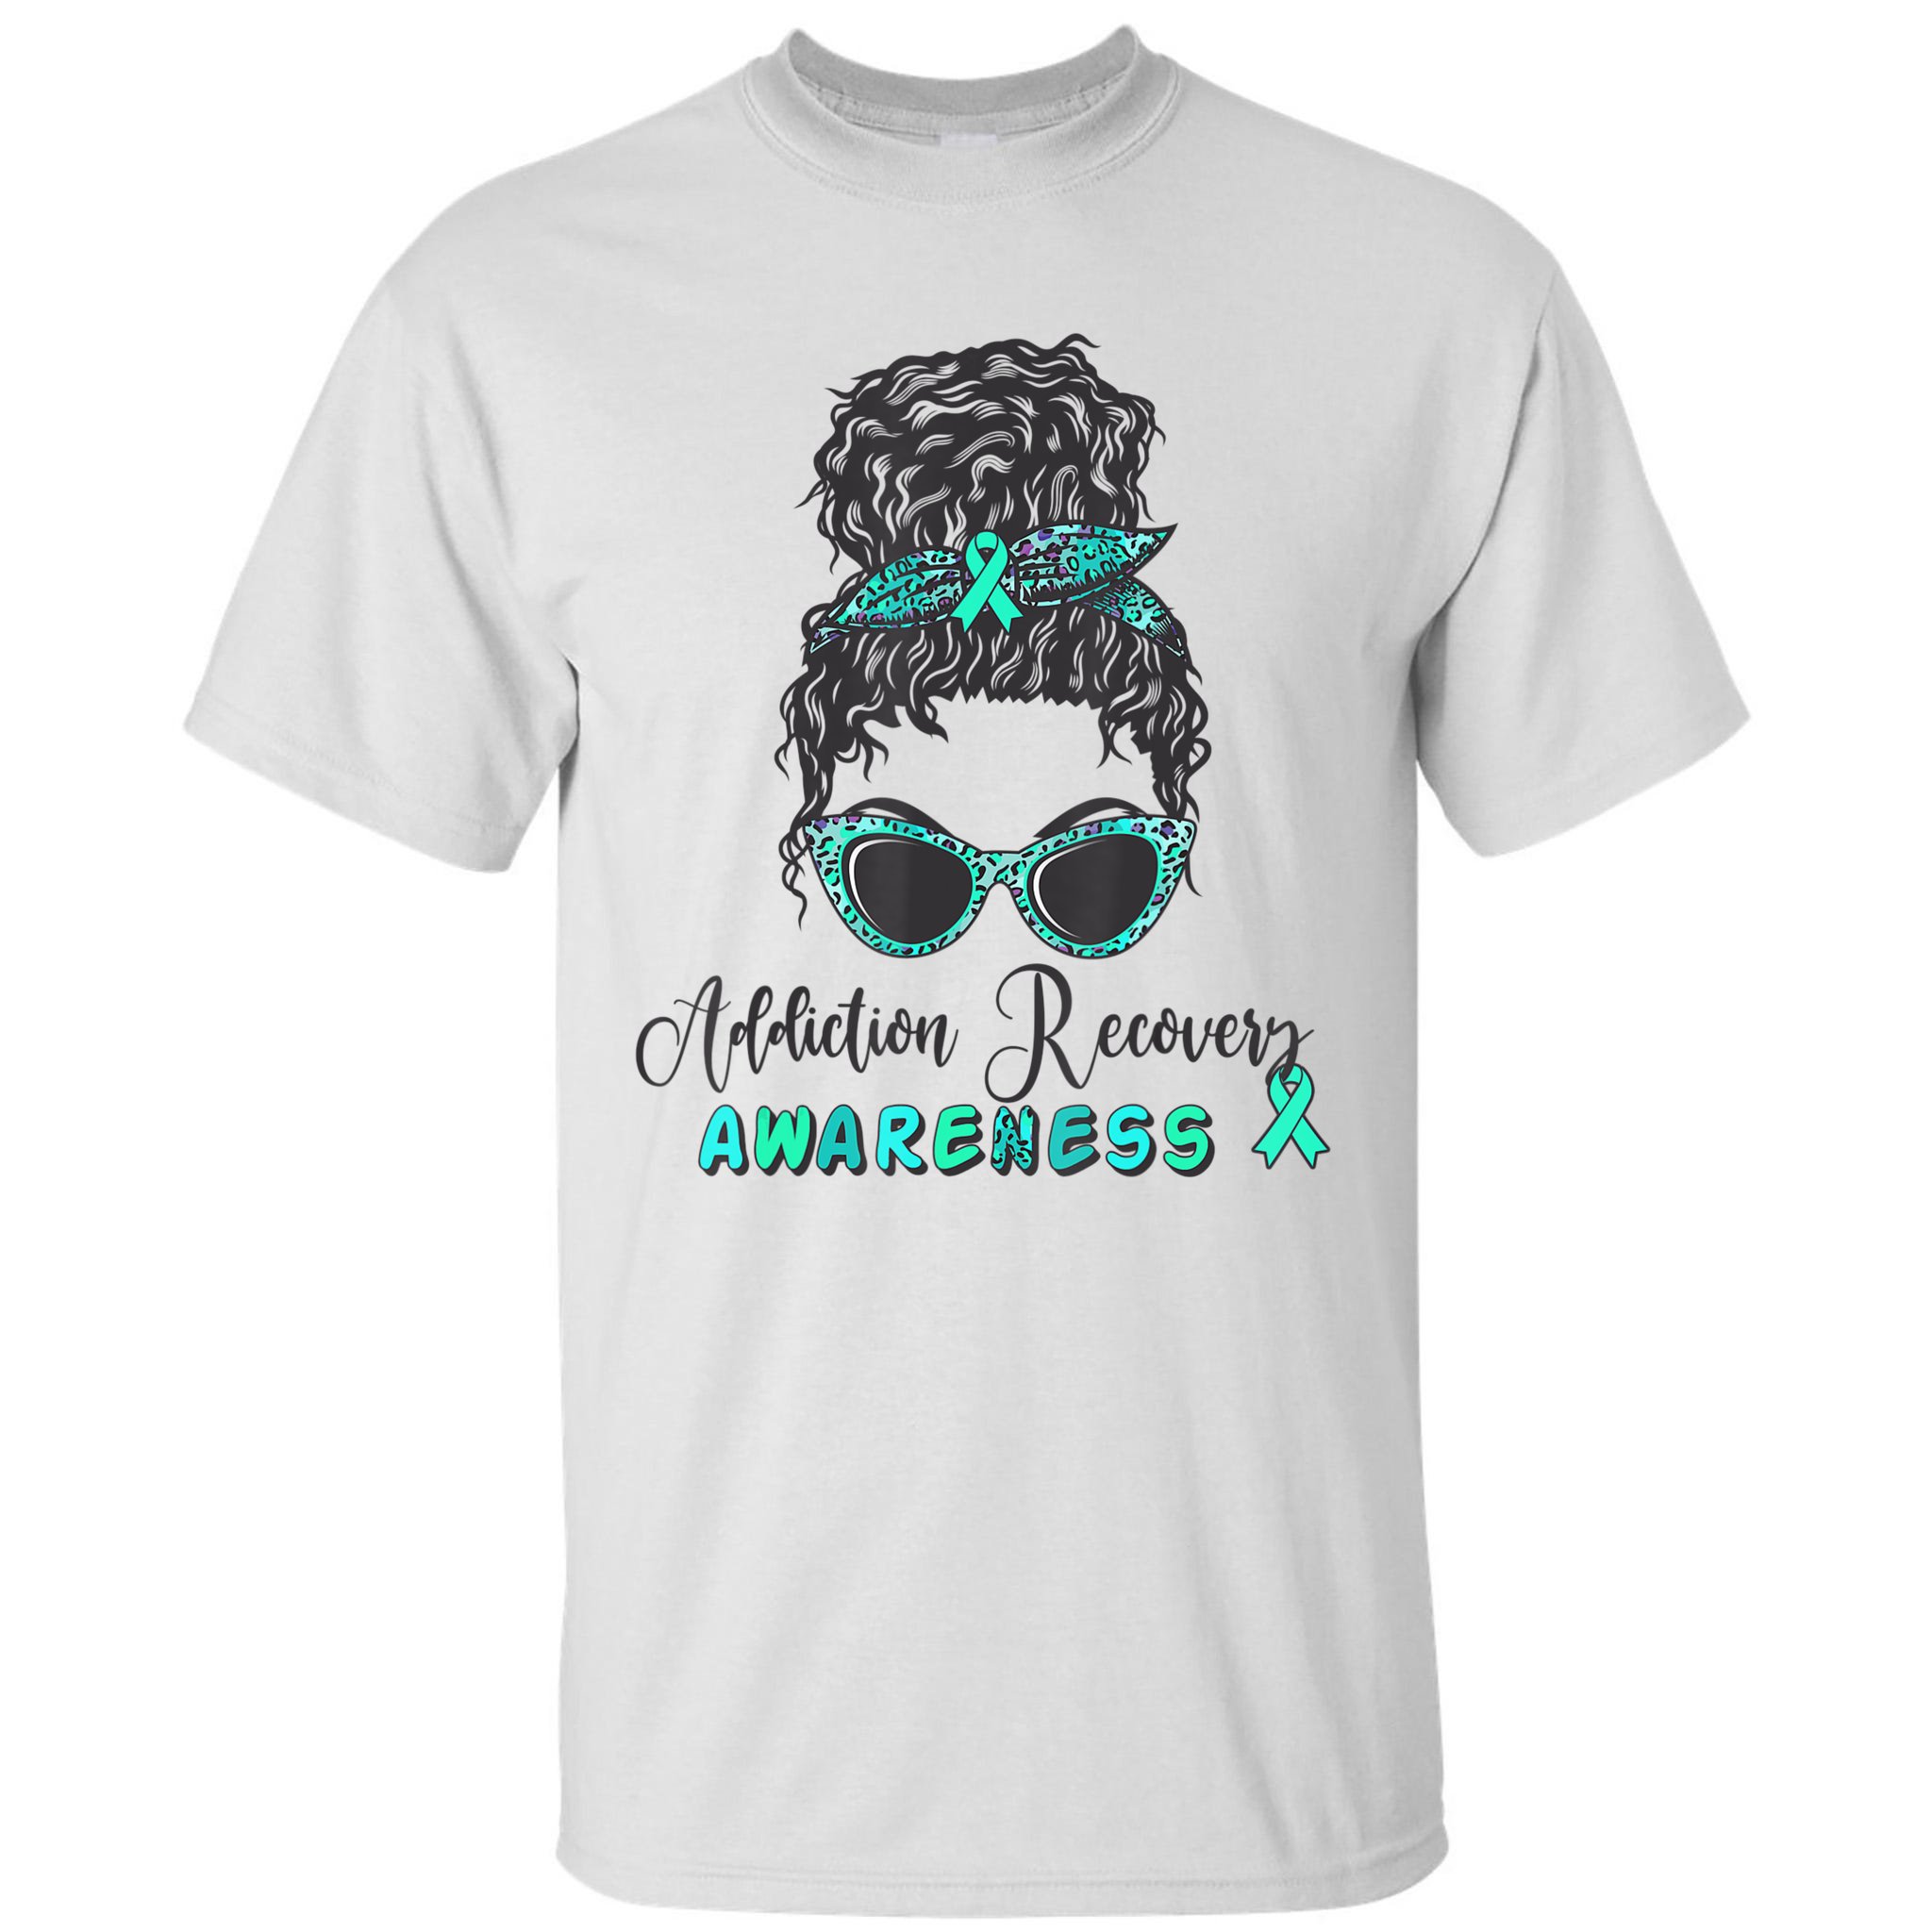 Addiction Recovery Awareness Month Sobriety Support Tall T-Shirt